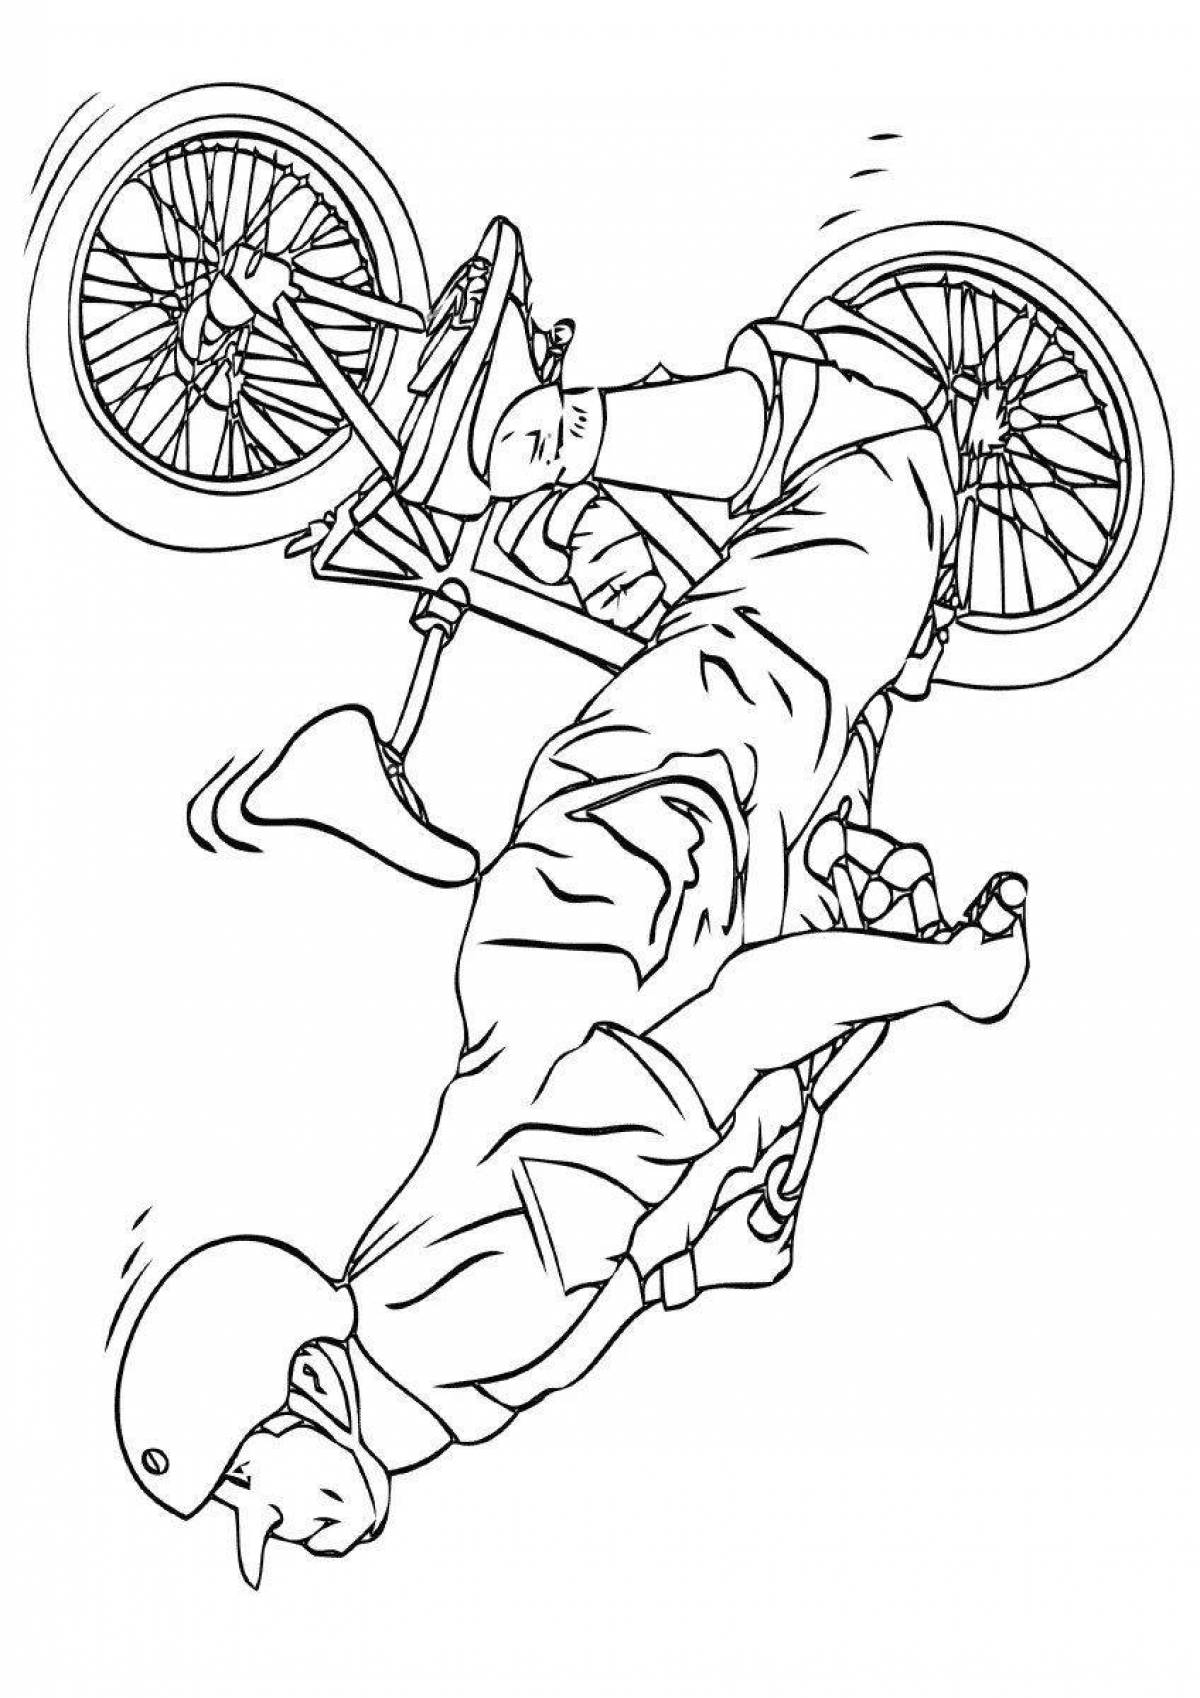 Coloring page playful stunt scooter